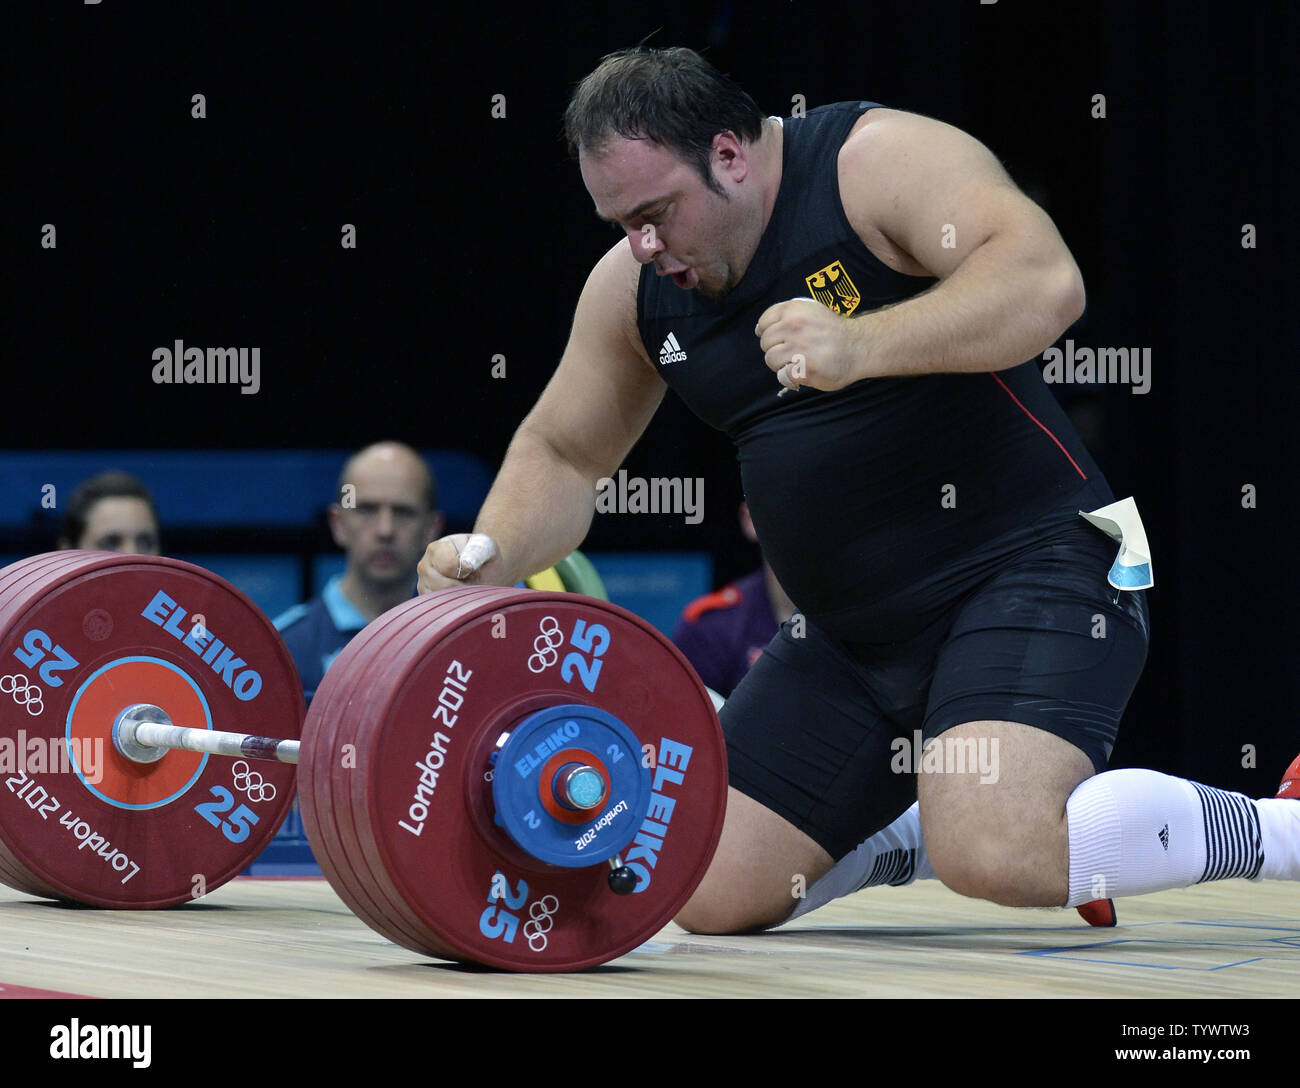 German weightlifter Almir Velagic drops to the floor in jubilation after he makes a successful lift during the Men's 105kg+ Group A class, at the Excel Arena at the 2012 Summer Olympics, August 7, 2012, in London, England.              UPI/Mike Theiler Stock Photo